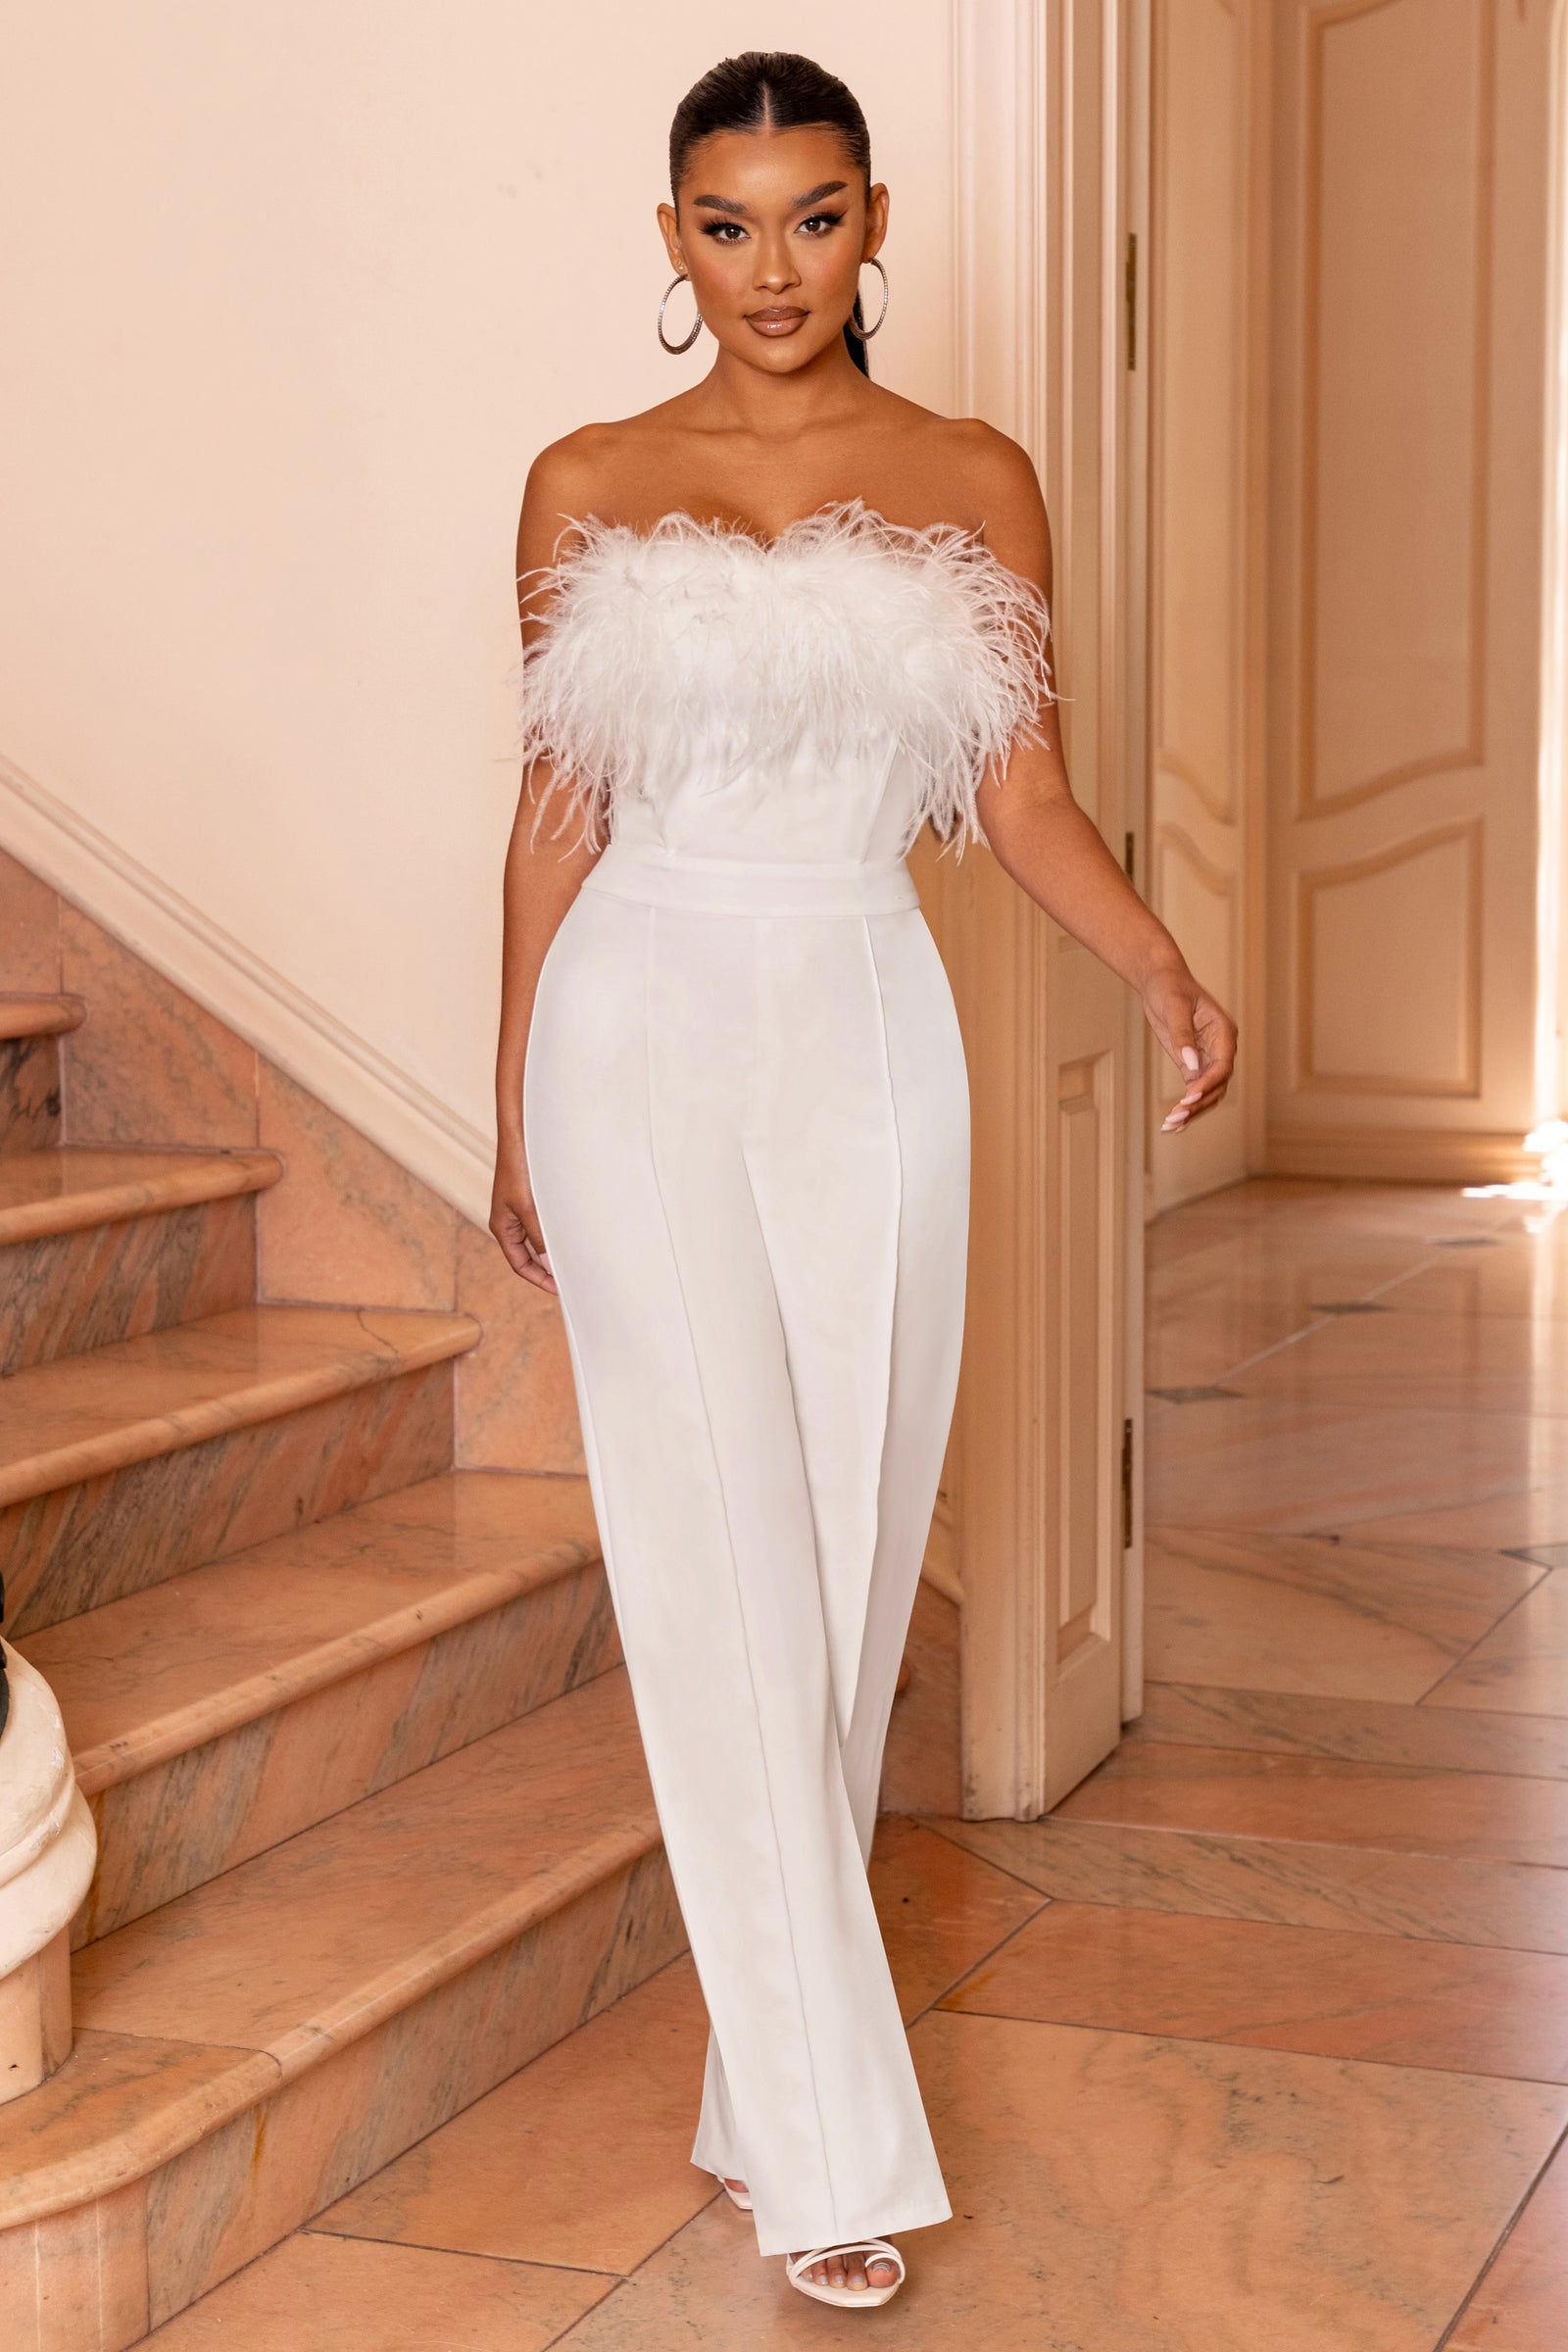 White Formal Jumpsuit Womens, Bridal White Jumpsuit, Women Onepiece for  Wedding Reception, Birthday Outfit, Sleeveless Jumpsuit With Corset -   Canada